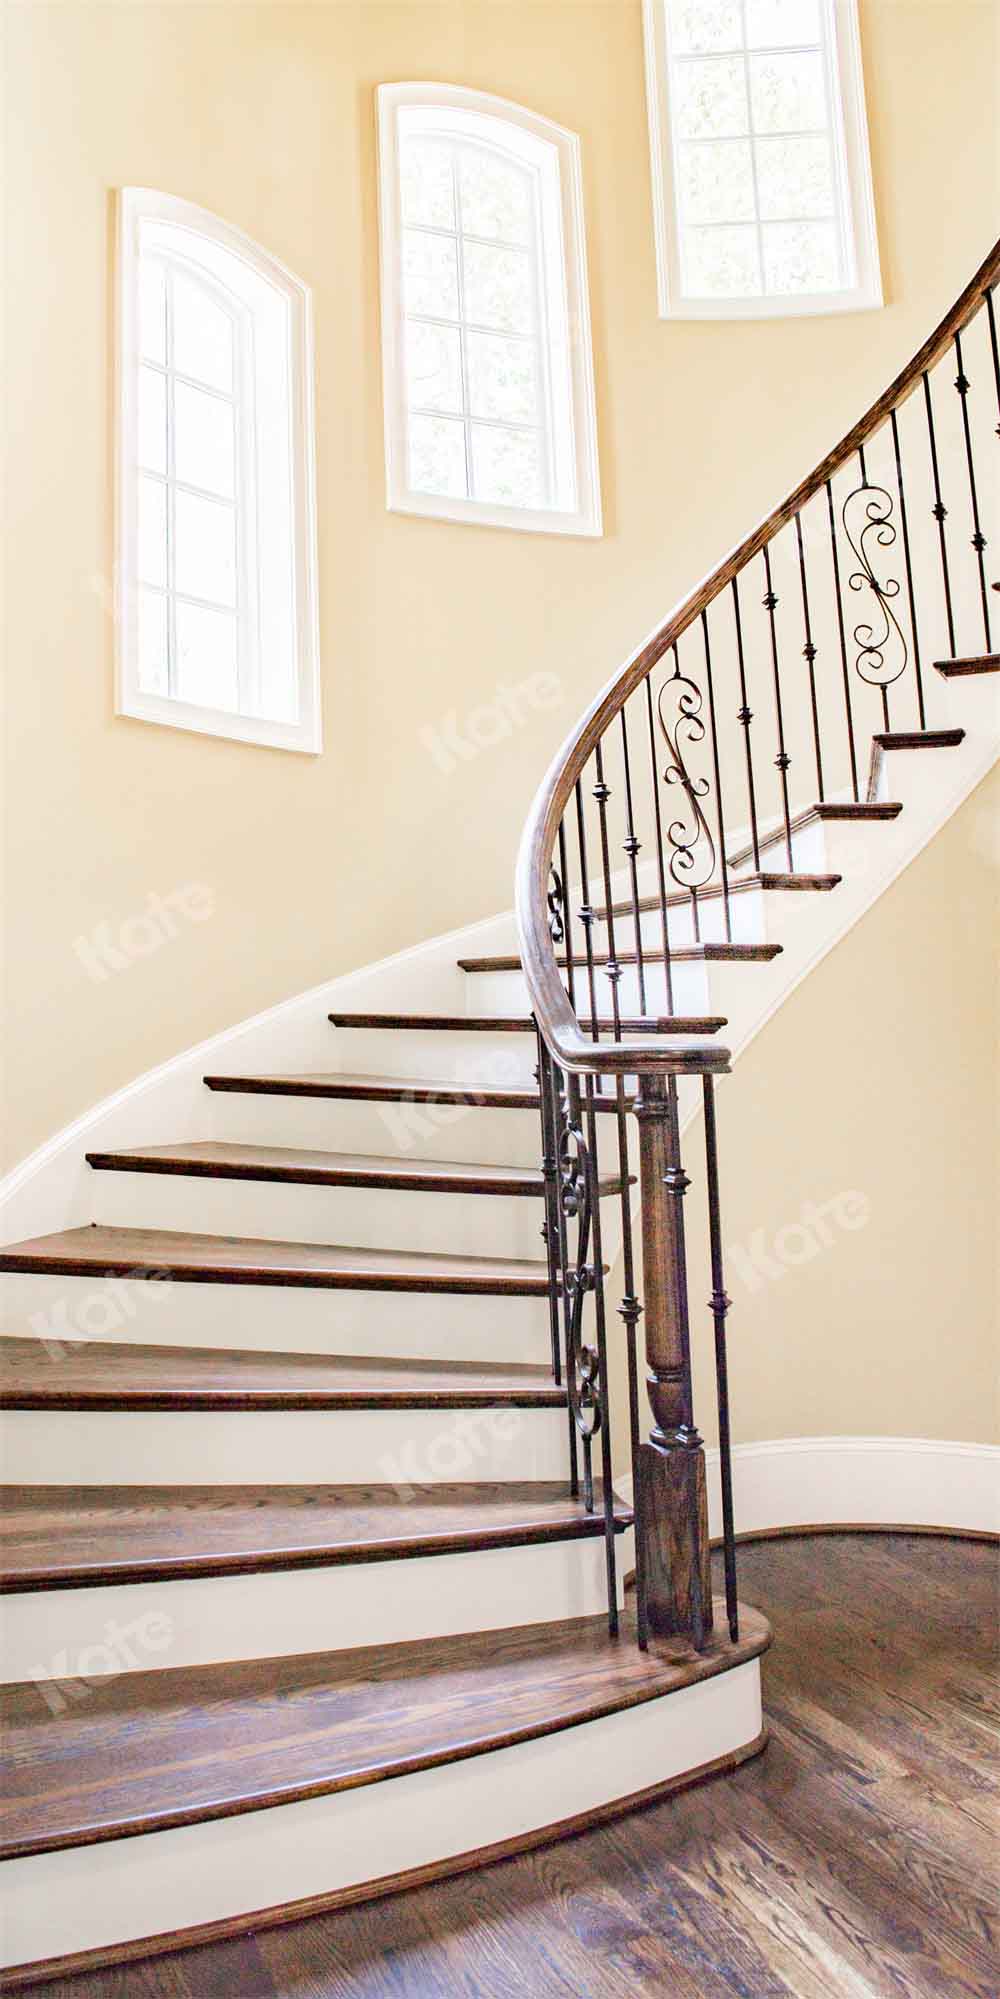 Kate Grand Staircase Space Backdrop Wood Grain Designed by Kate Image